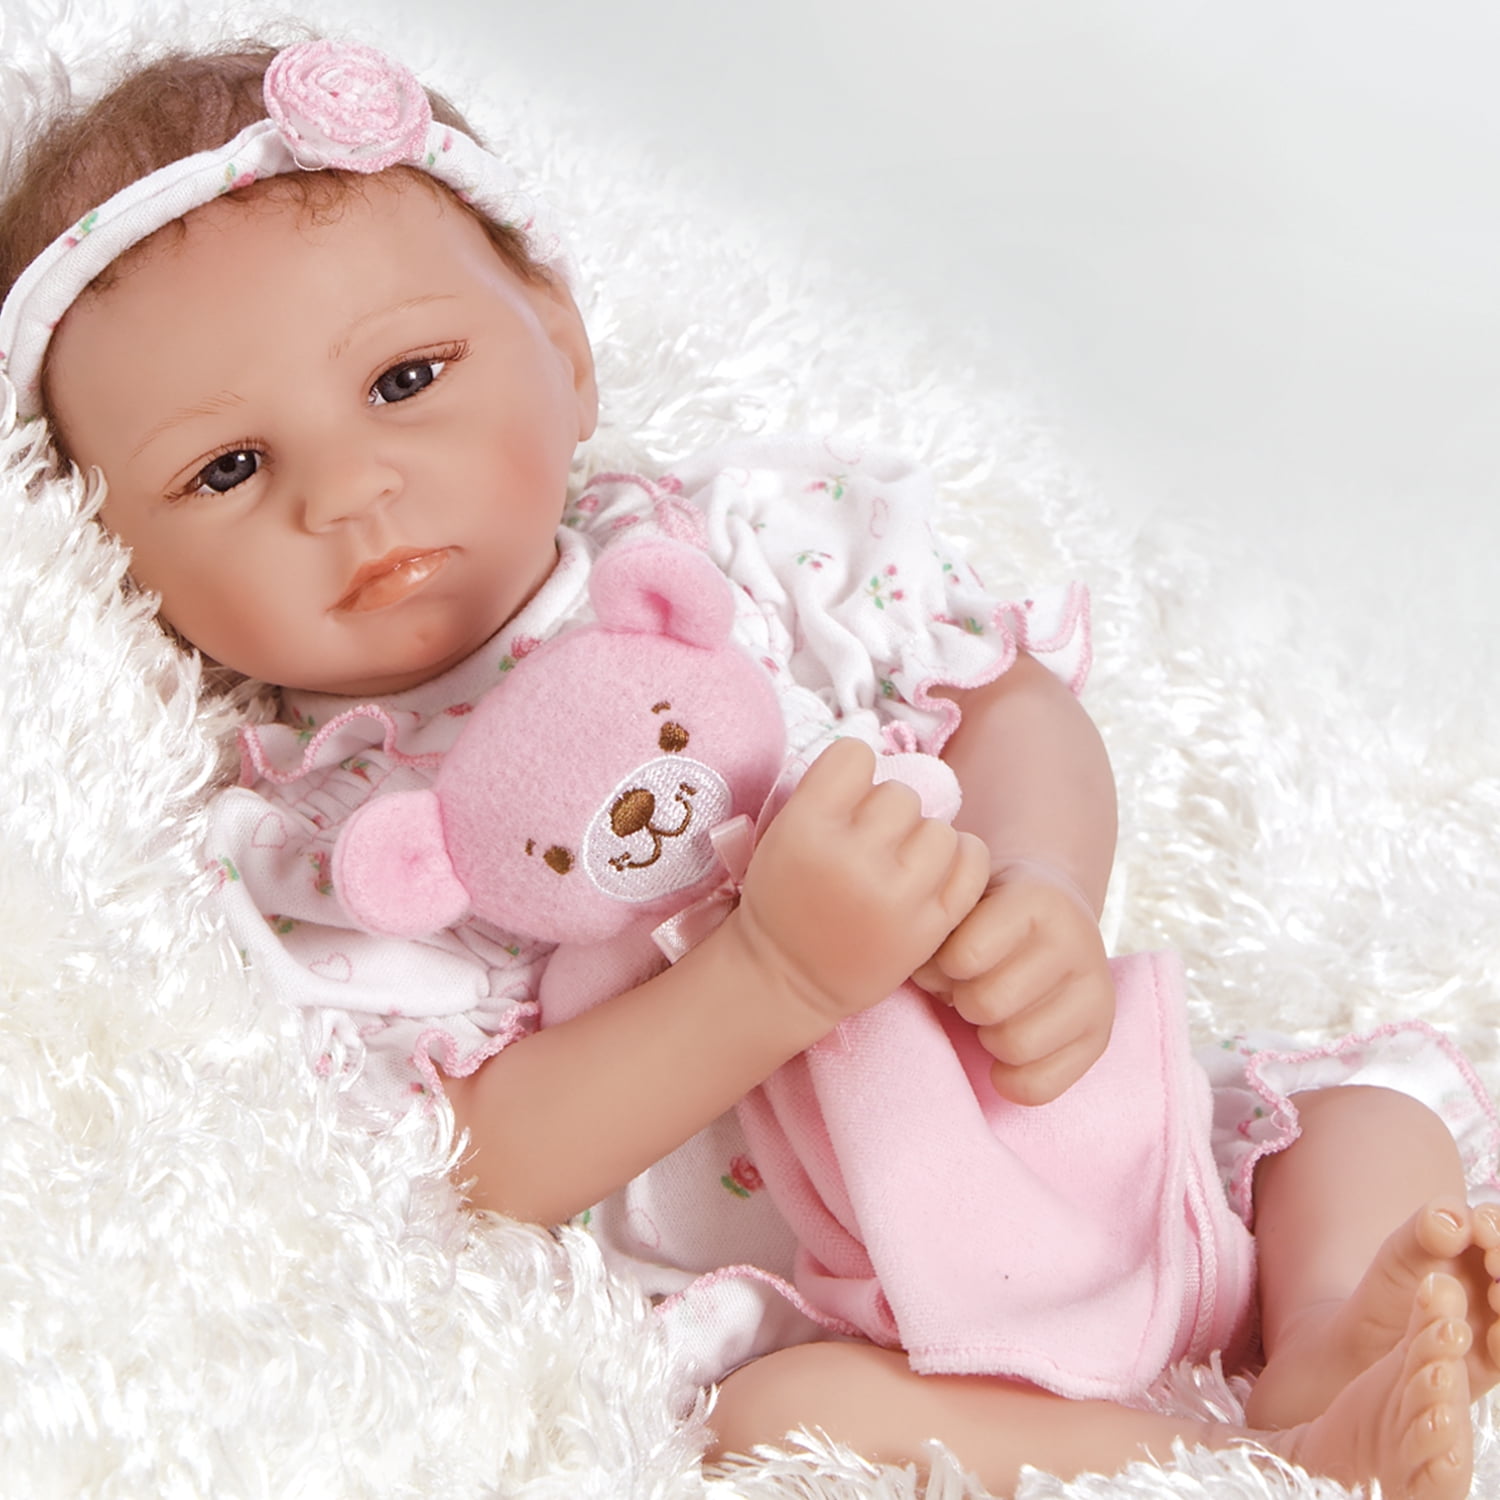 Paradise Galleries Reborn Baby Doll Girl - 18 inch Sleeping Kitten with  Rooted Hair, Made in GentleTouch Vinyl, 5-Piece Realistic Doll Gift Set